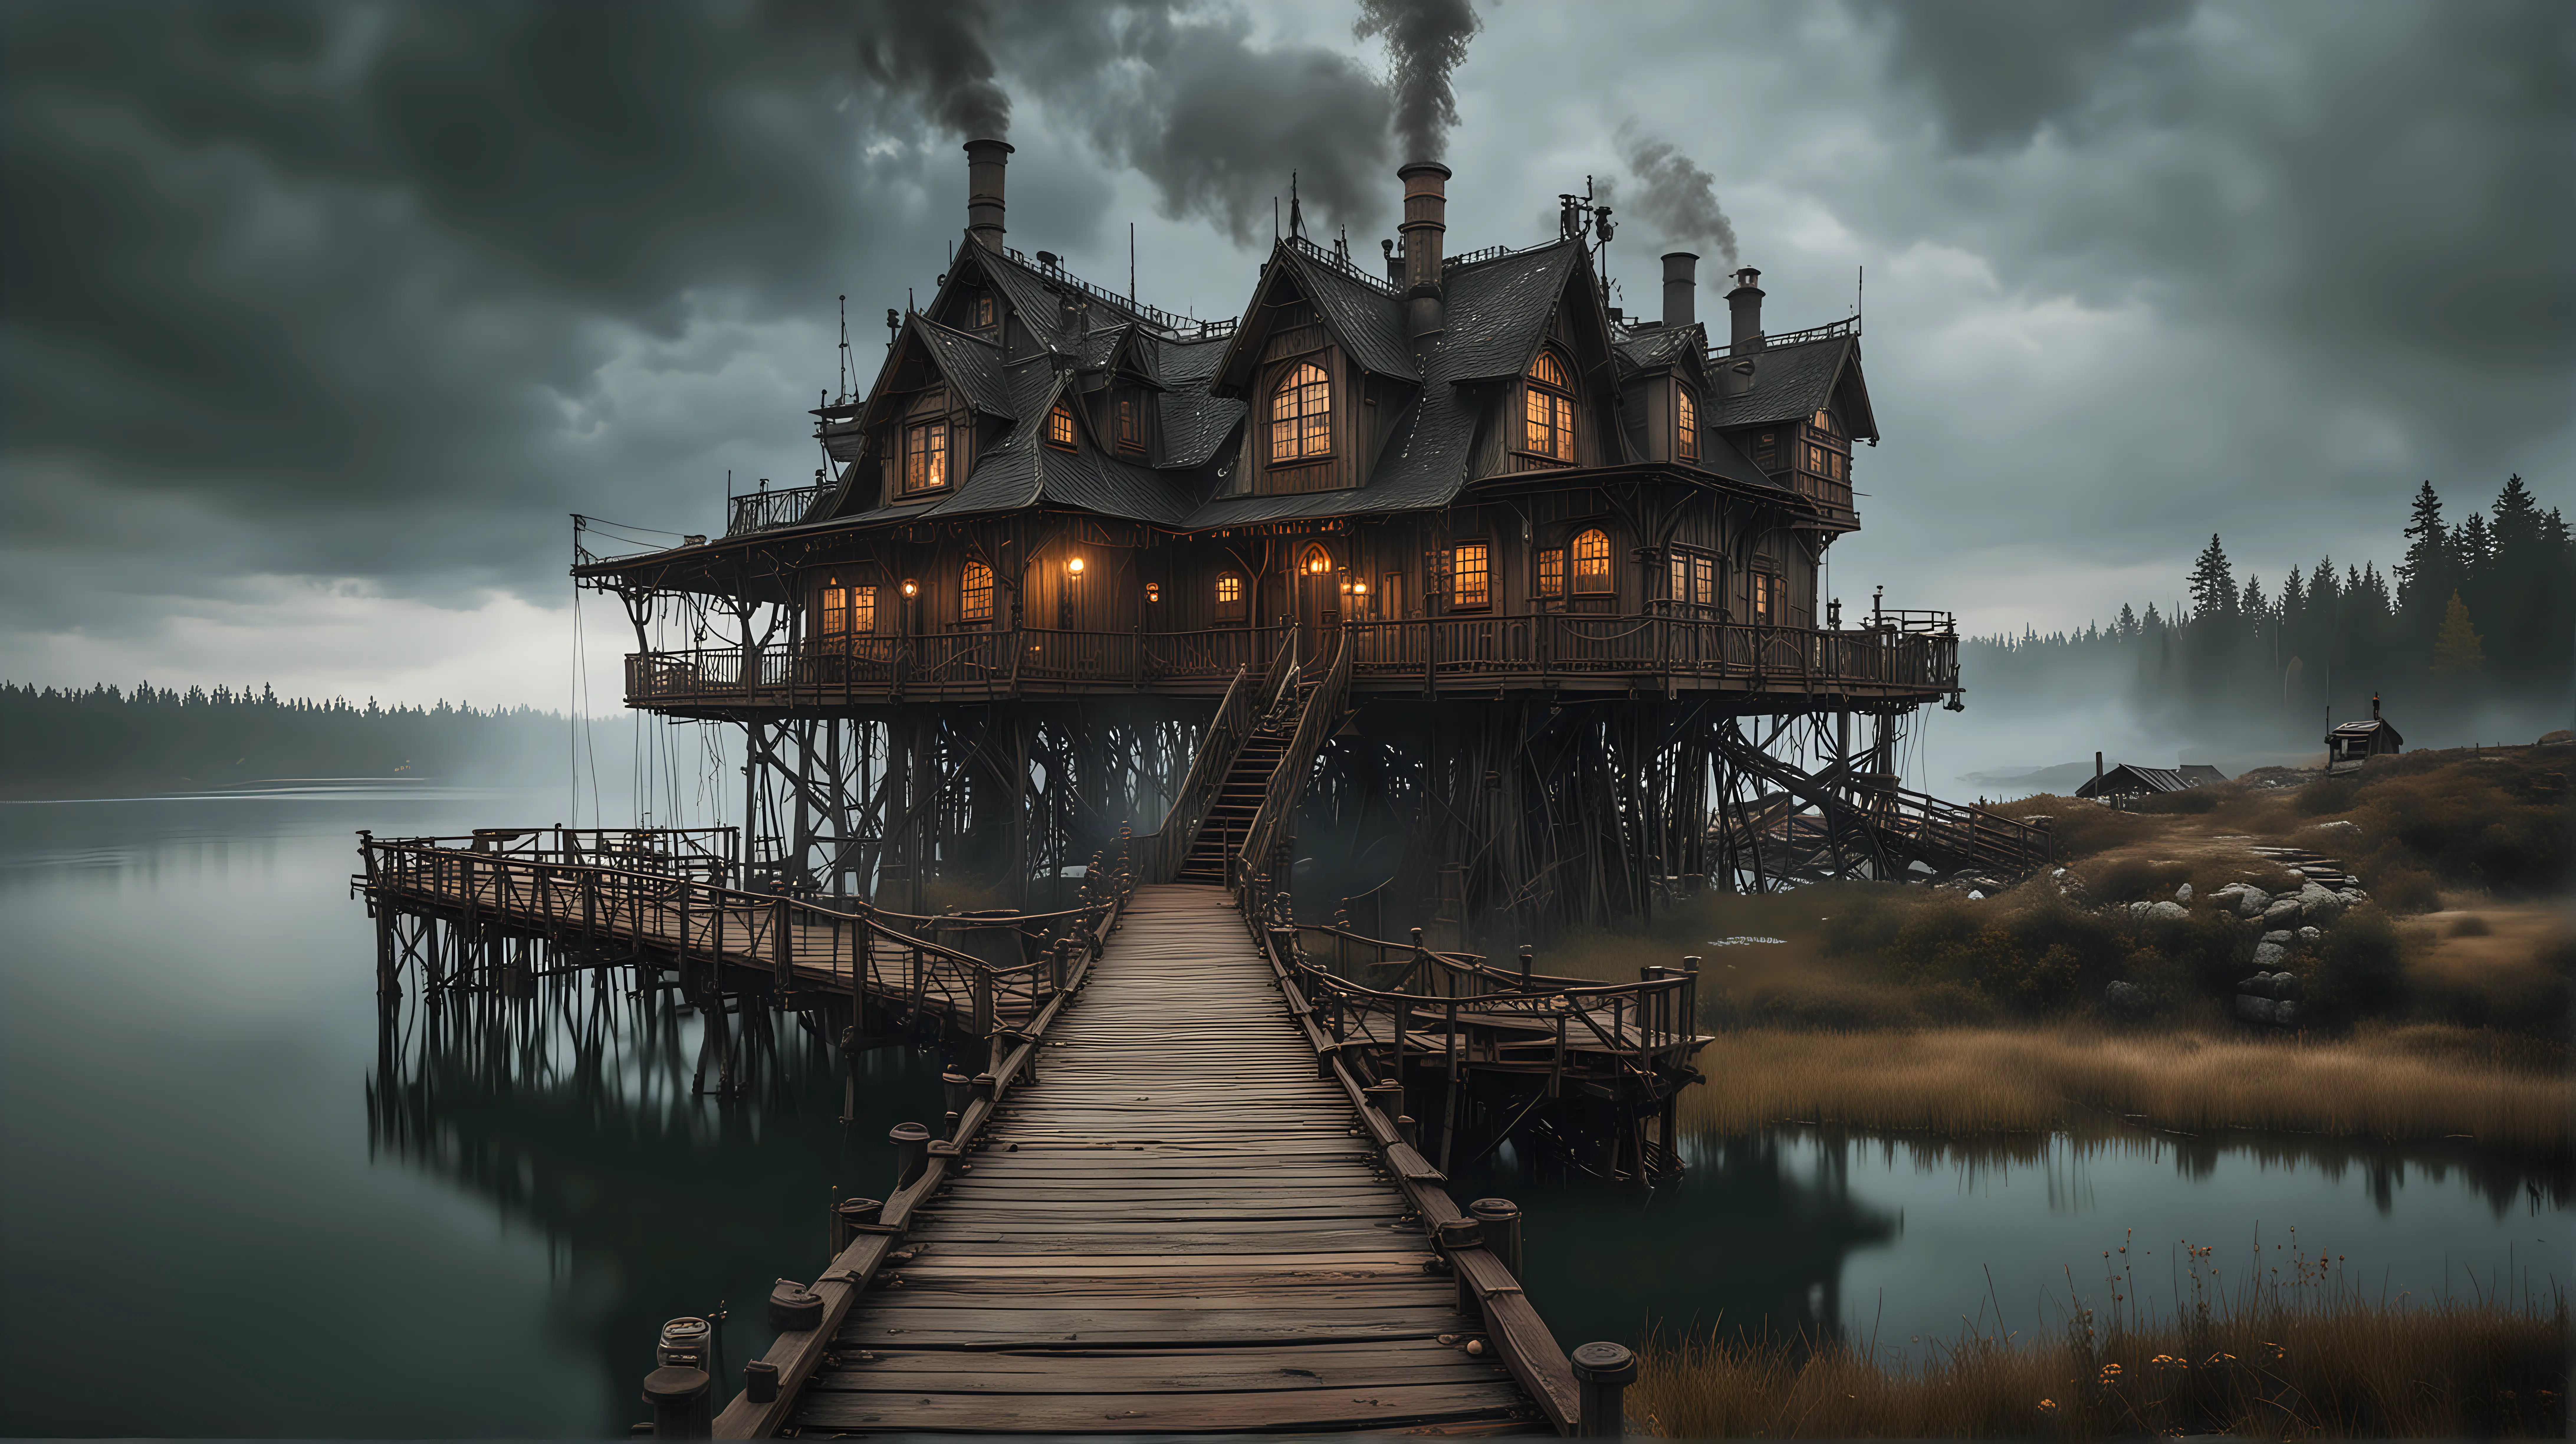 Steampunk House by the Wild Lake Enigmatic Abode Amidst Misty Shores